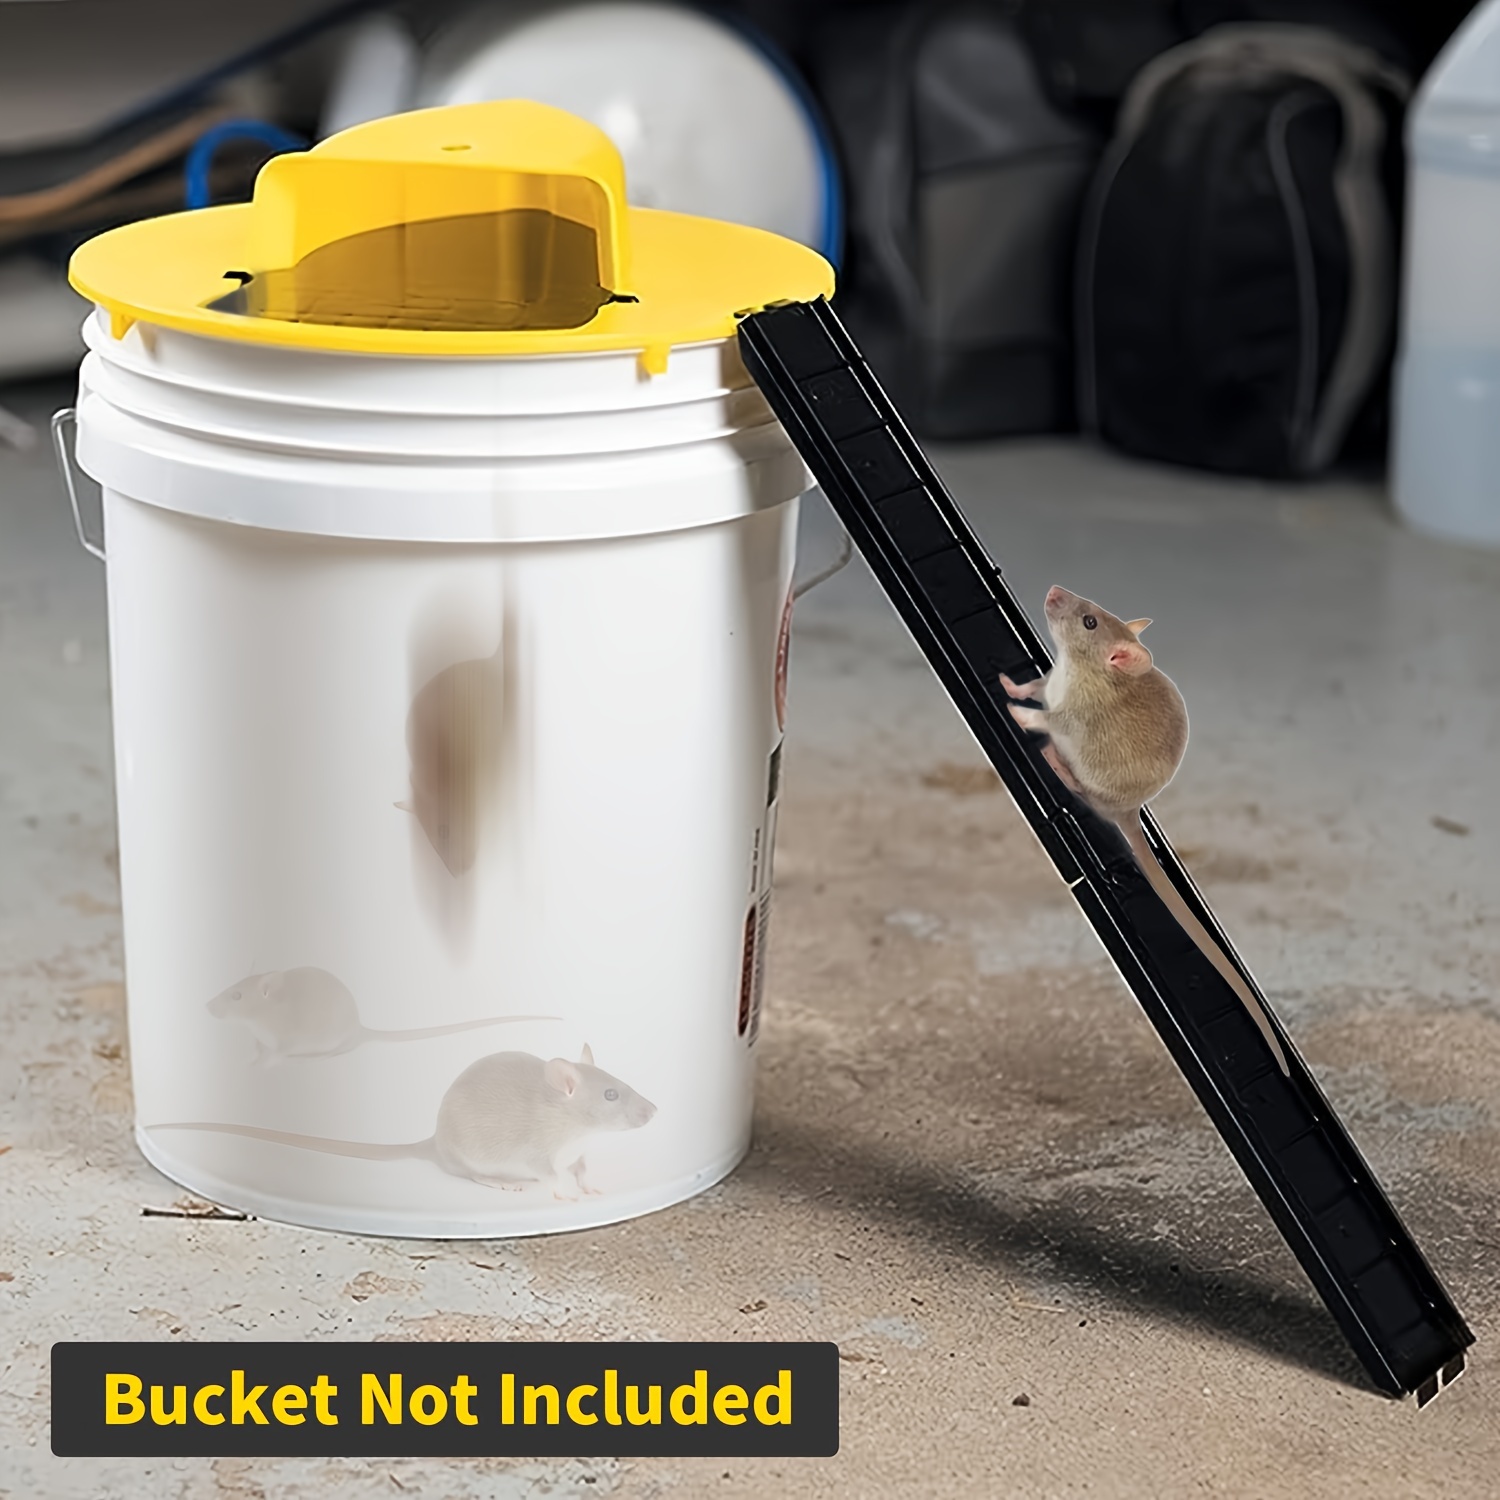 Flip And Slide Mouse Trap Lid for 5 Gallon Bucket. #linkinbio Experie